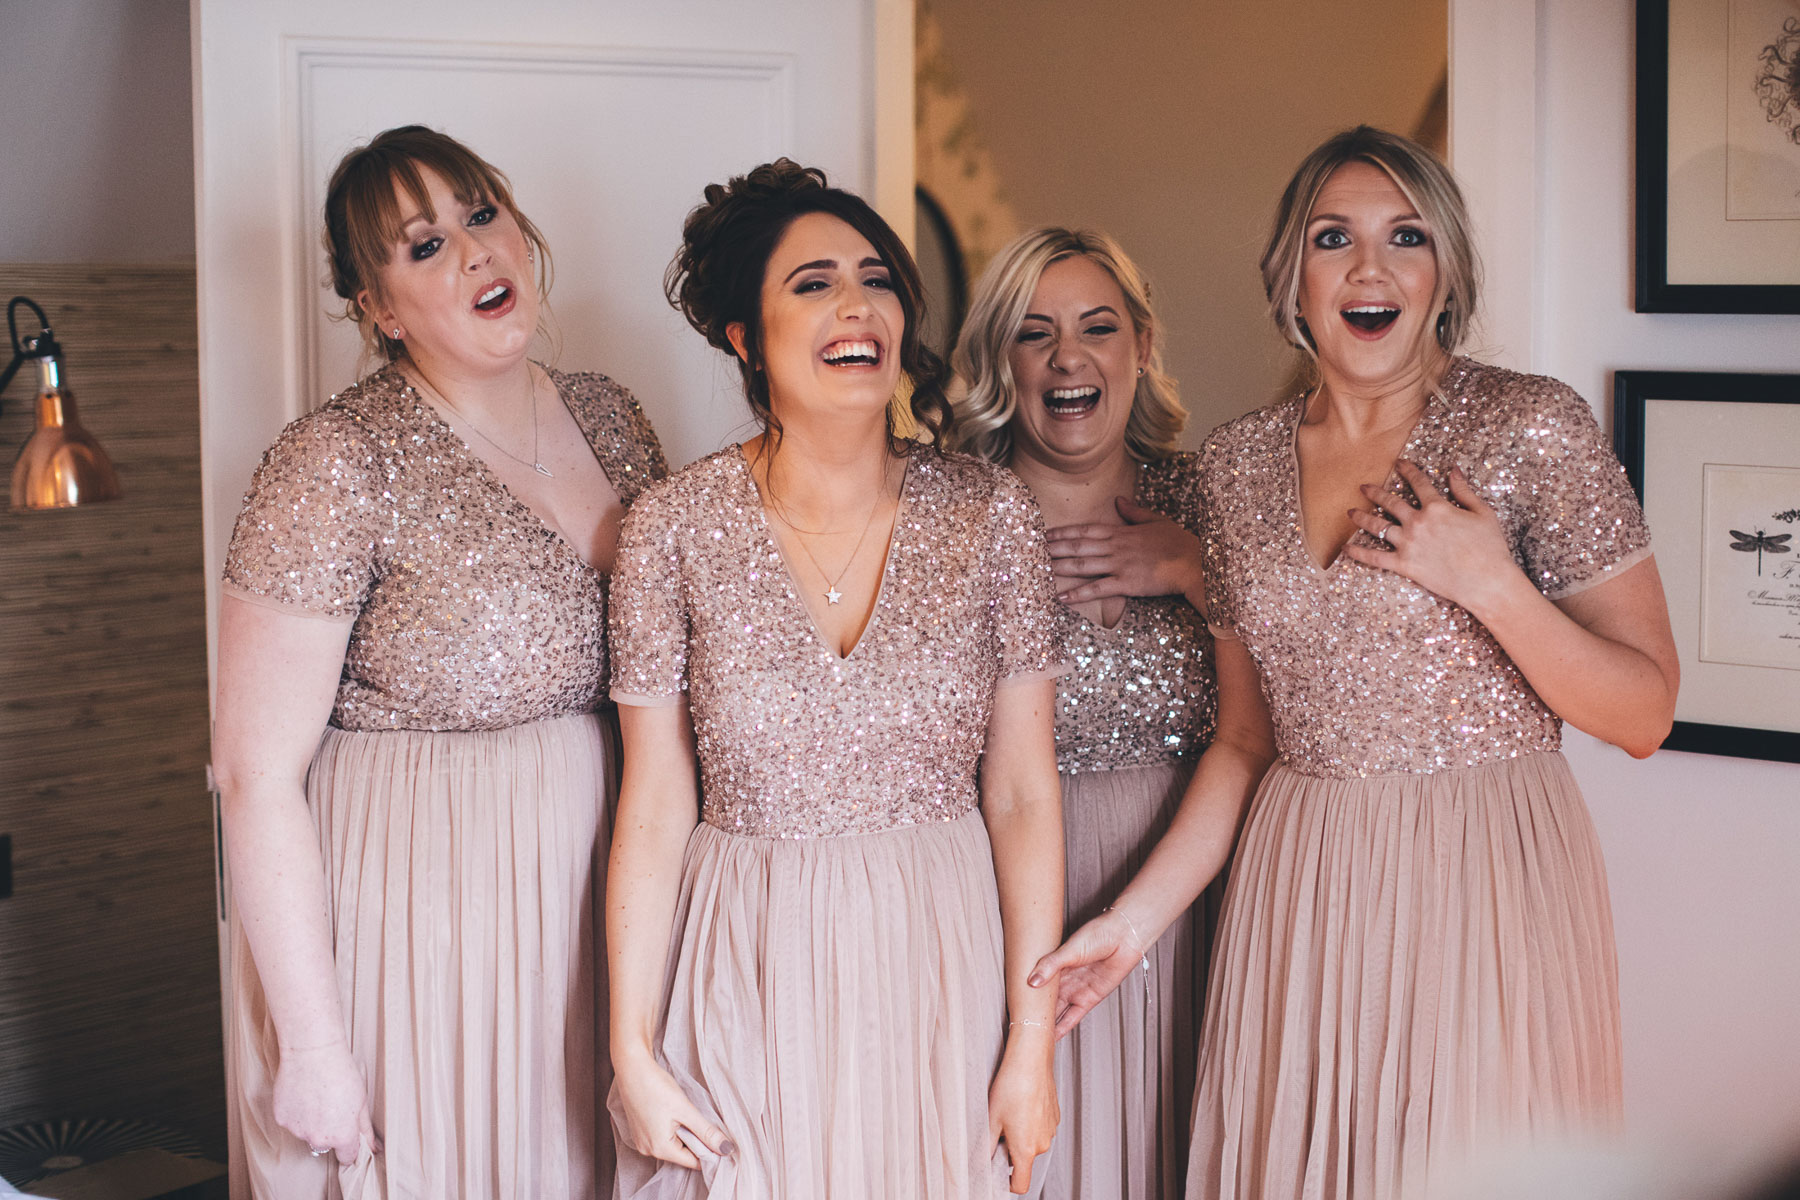 bridemaids look happy and shocked at how great the bride looks